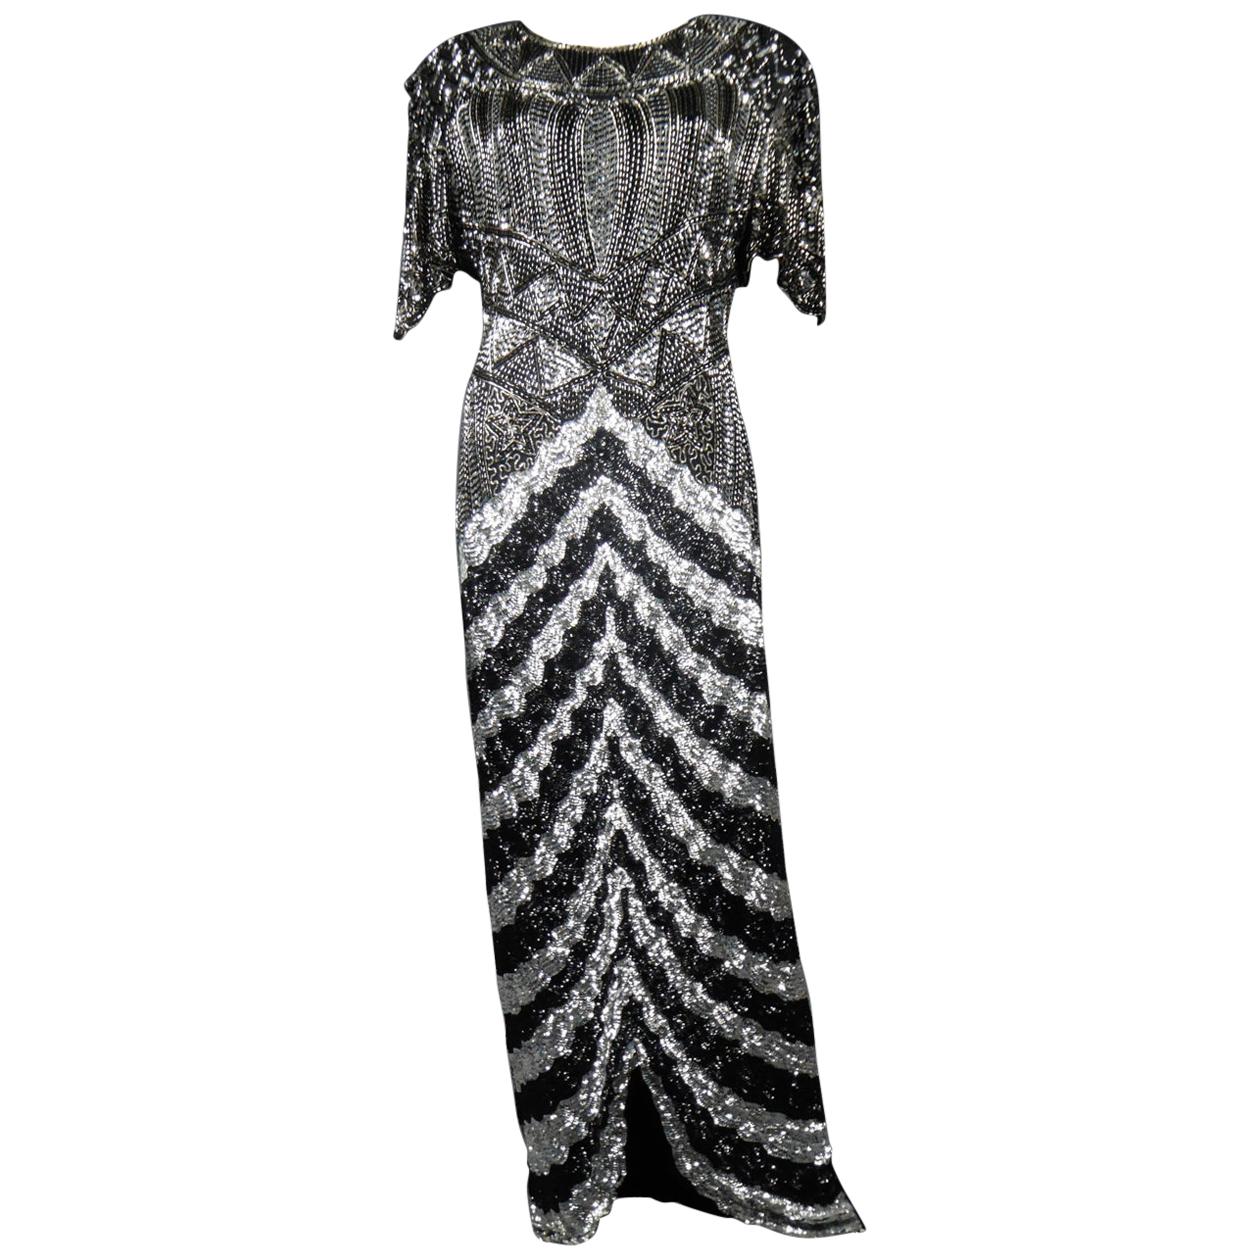 Circa 1980/1985
France

Music-Hall Evening Dress inspired by Art Deco in Silver and embroidered with black and silver faceted paillons and silver tubular pearls from the 1980s. Skin-tight dress with short flounced sleeves with small shouder pads.